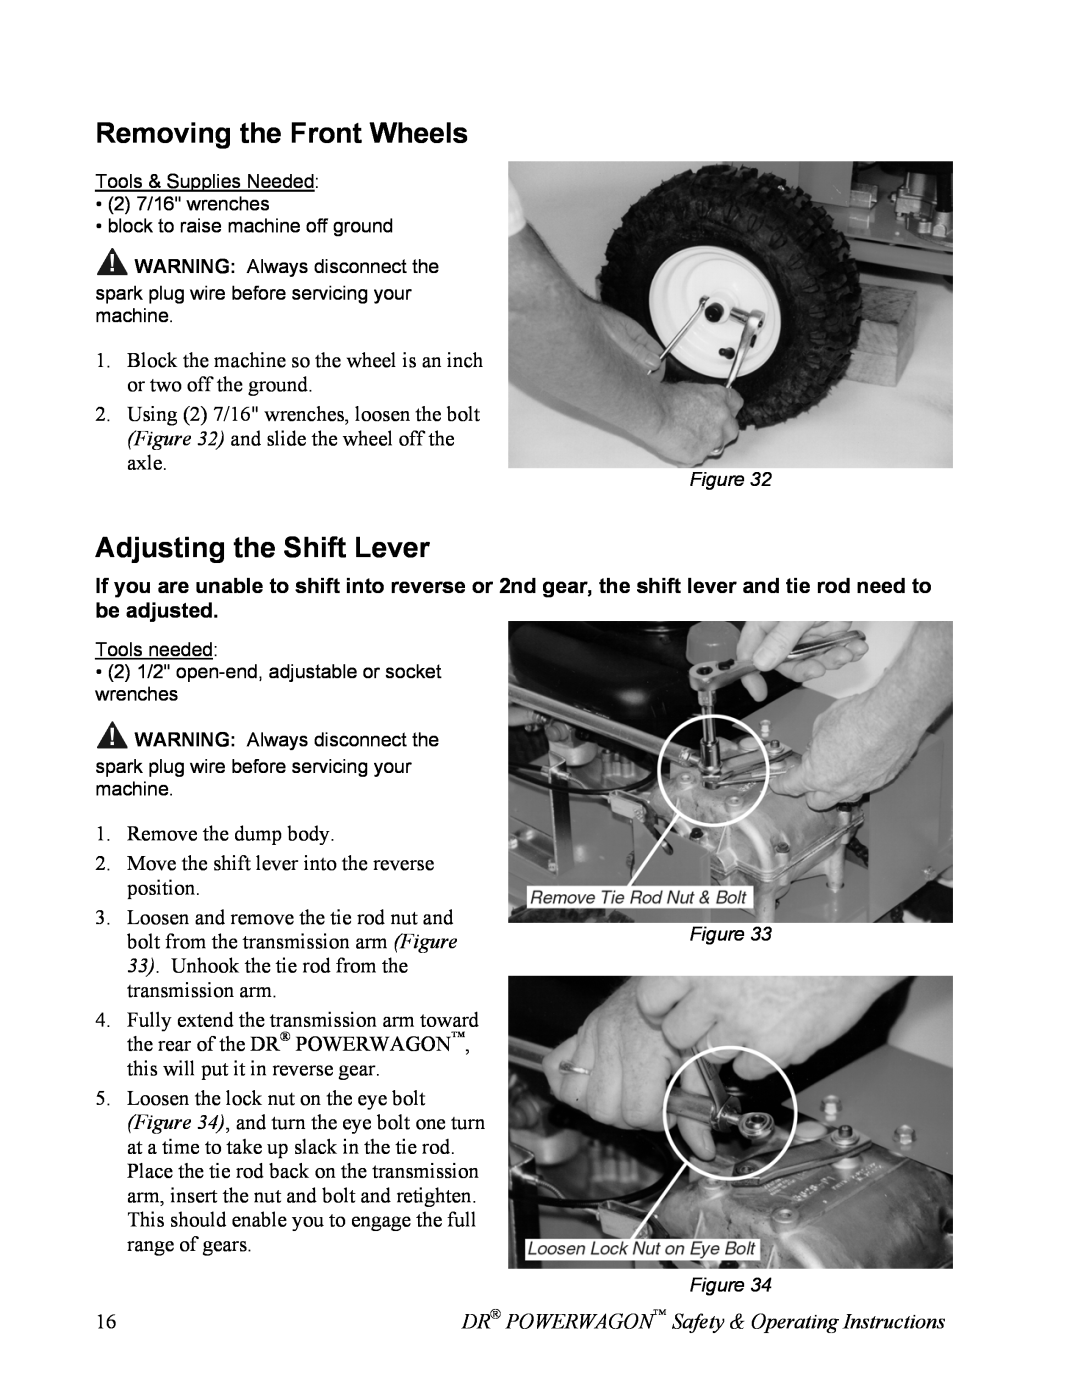 Country Home Products SUBURBANTM owner manual Removing the Front Wheels, Adjusting the Shift Lever 